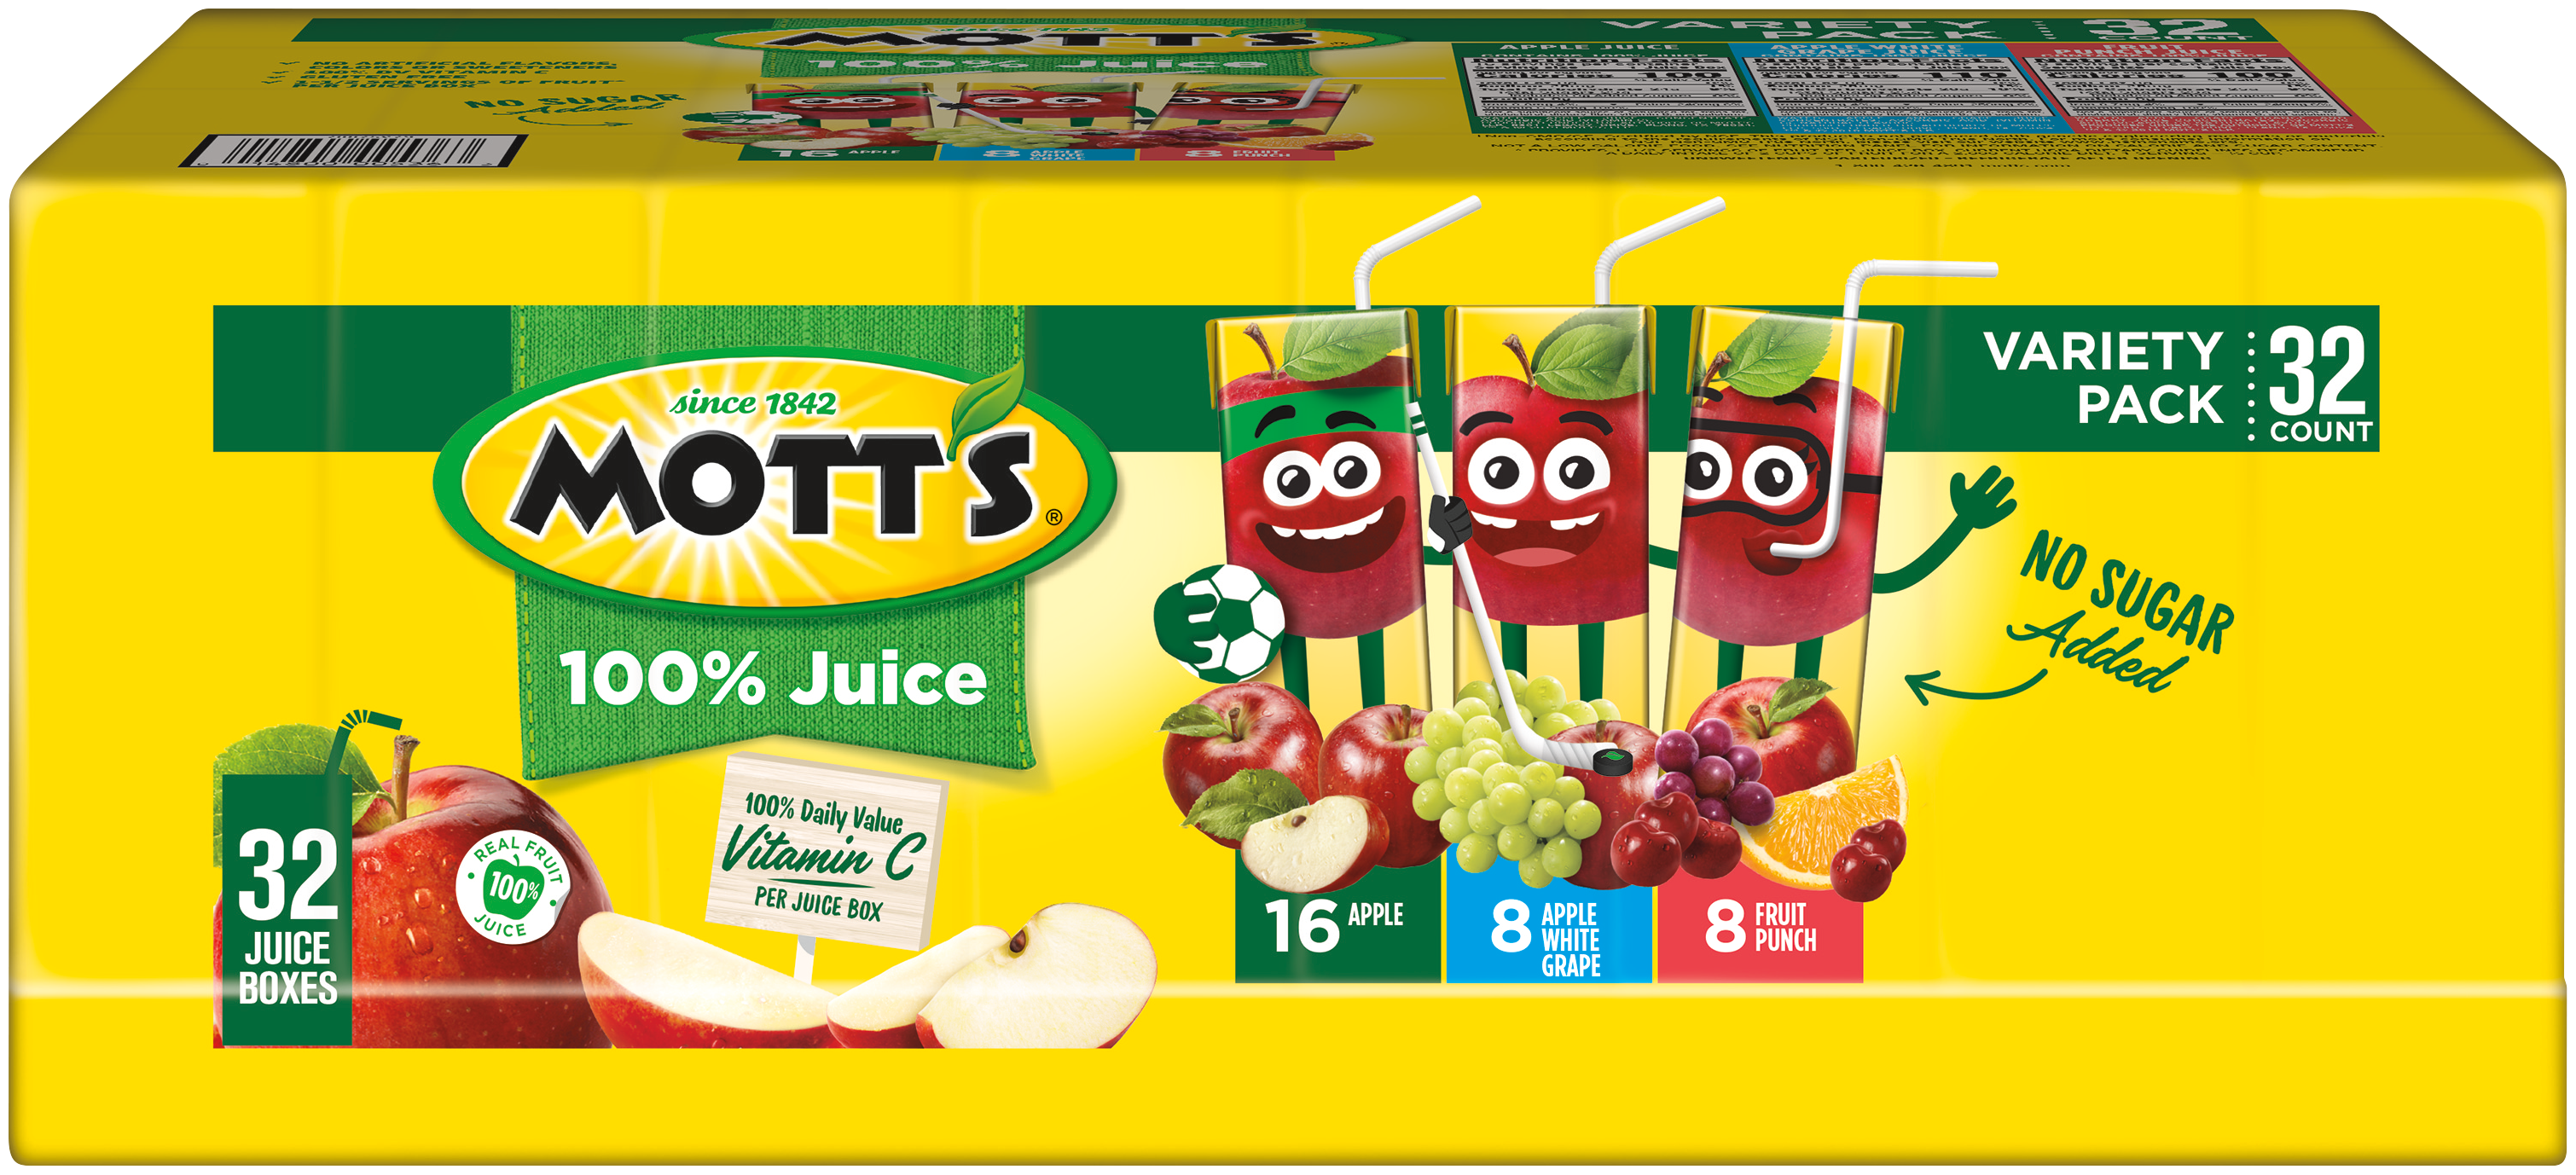 https://www.motts.com/images/products/sizes/motts-100-fruit-punch-juice_variety_box.png